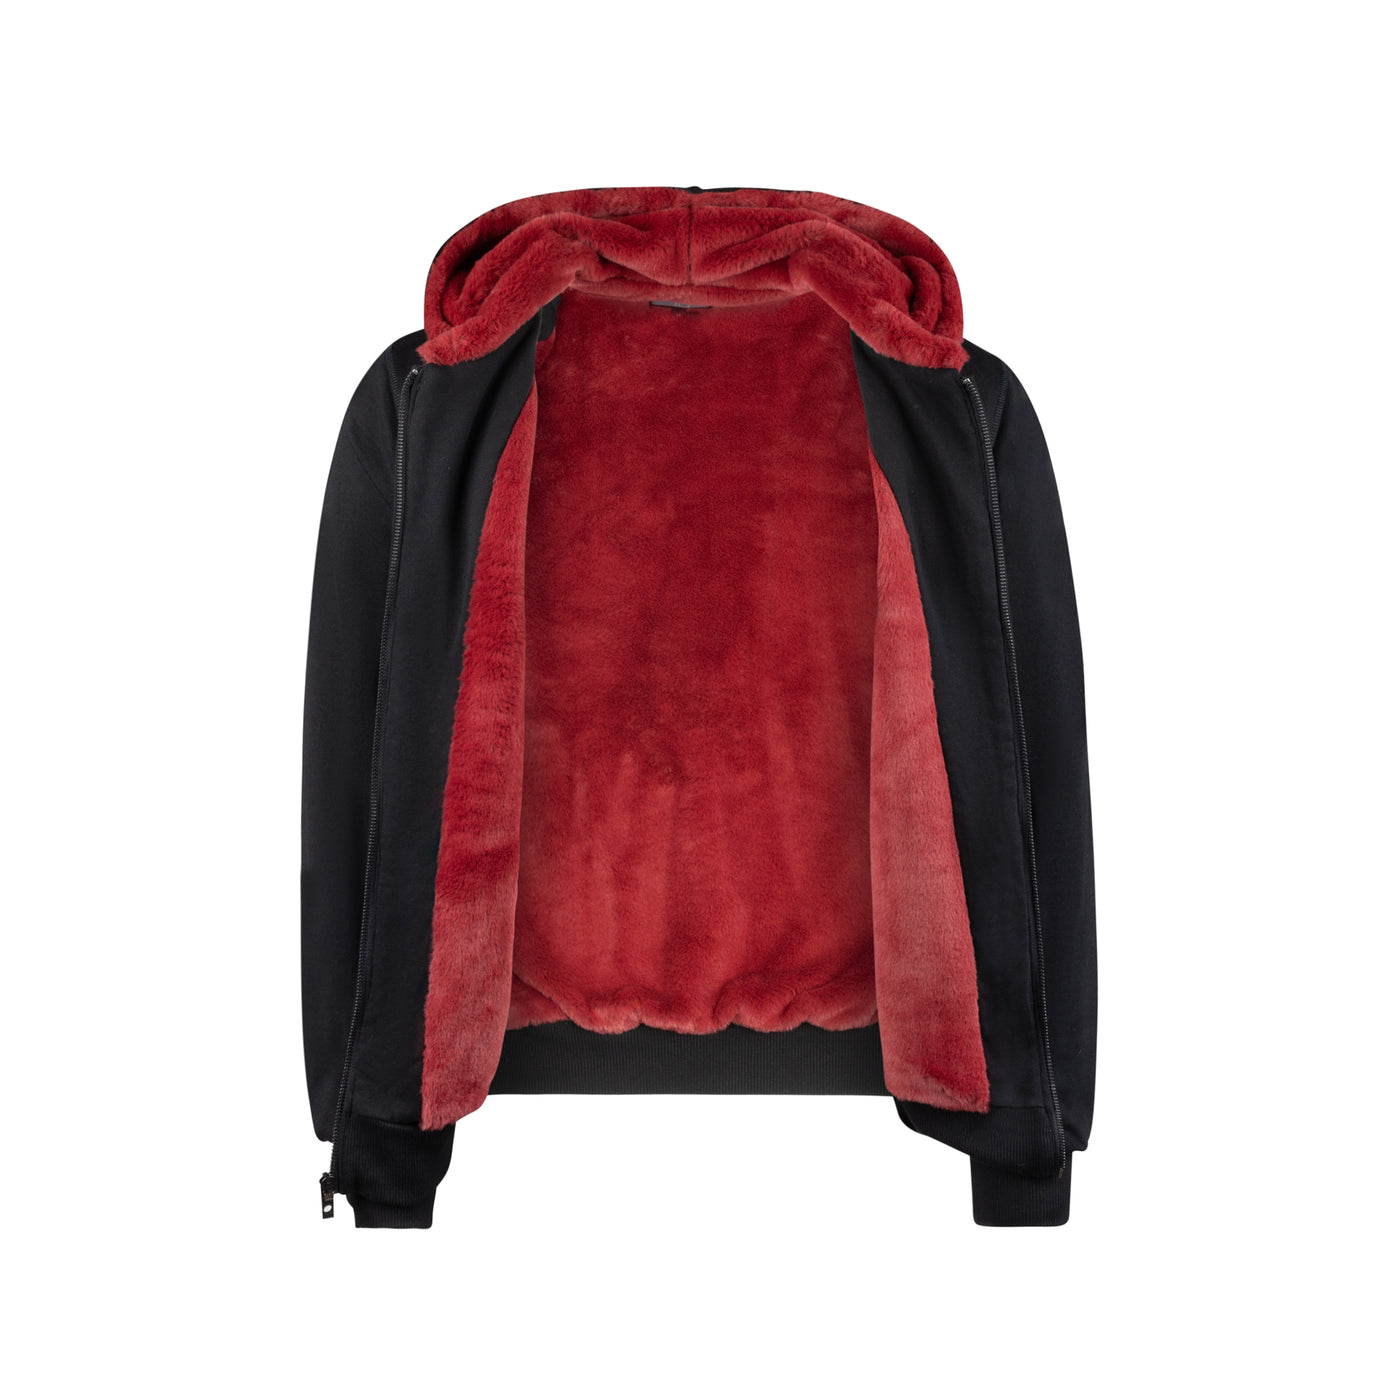 Dulce Black Hoodie with Red Fur